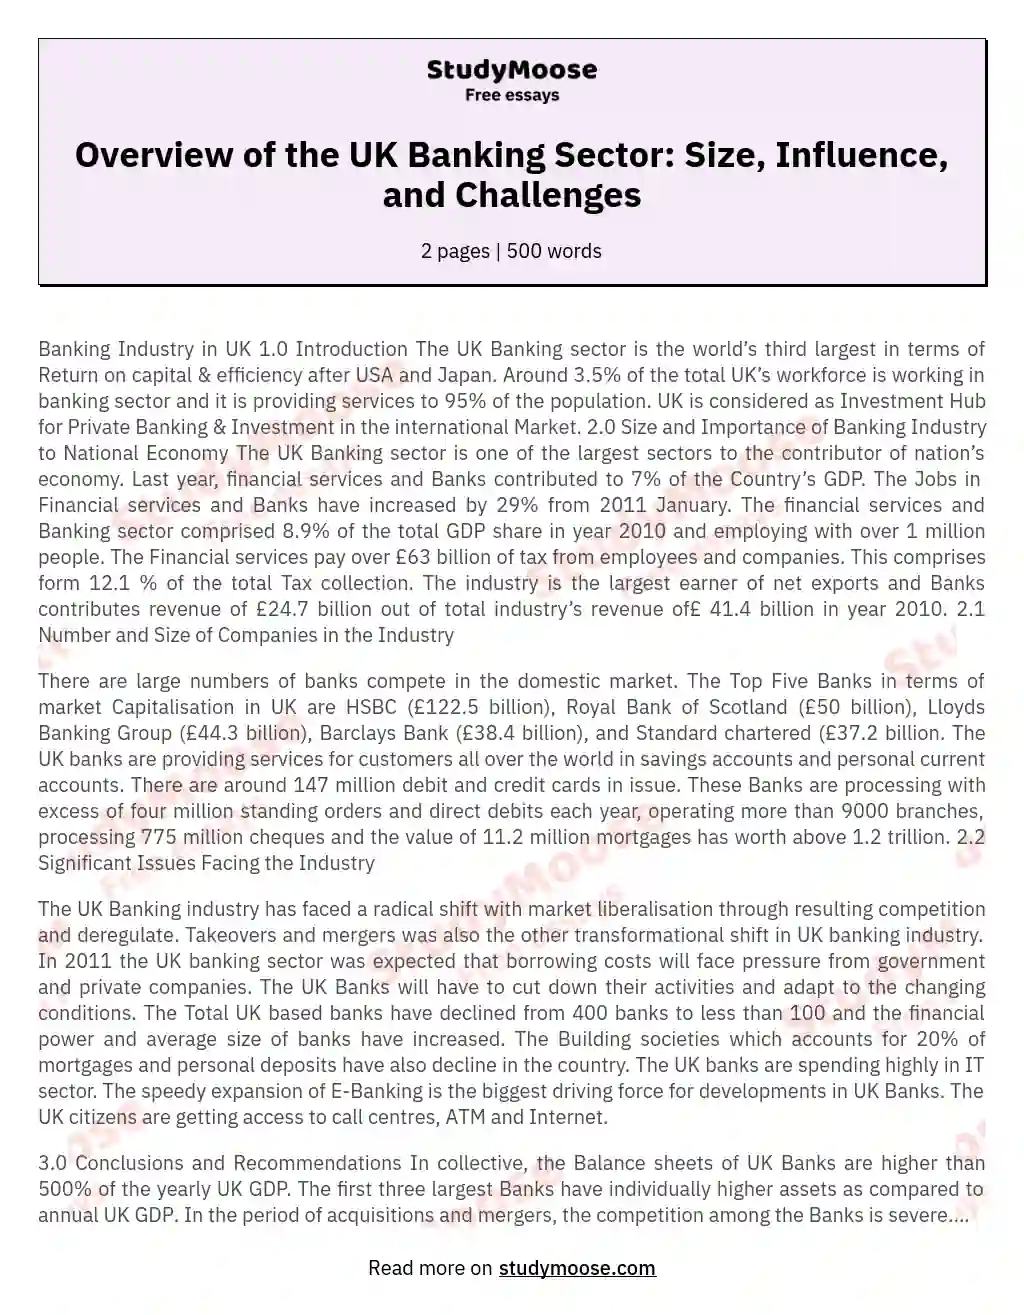 Overview of the UK Banking Sector: Size, Influence, and Challenges essay